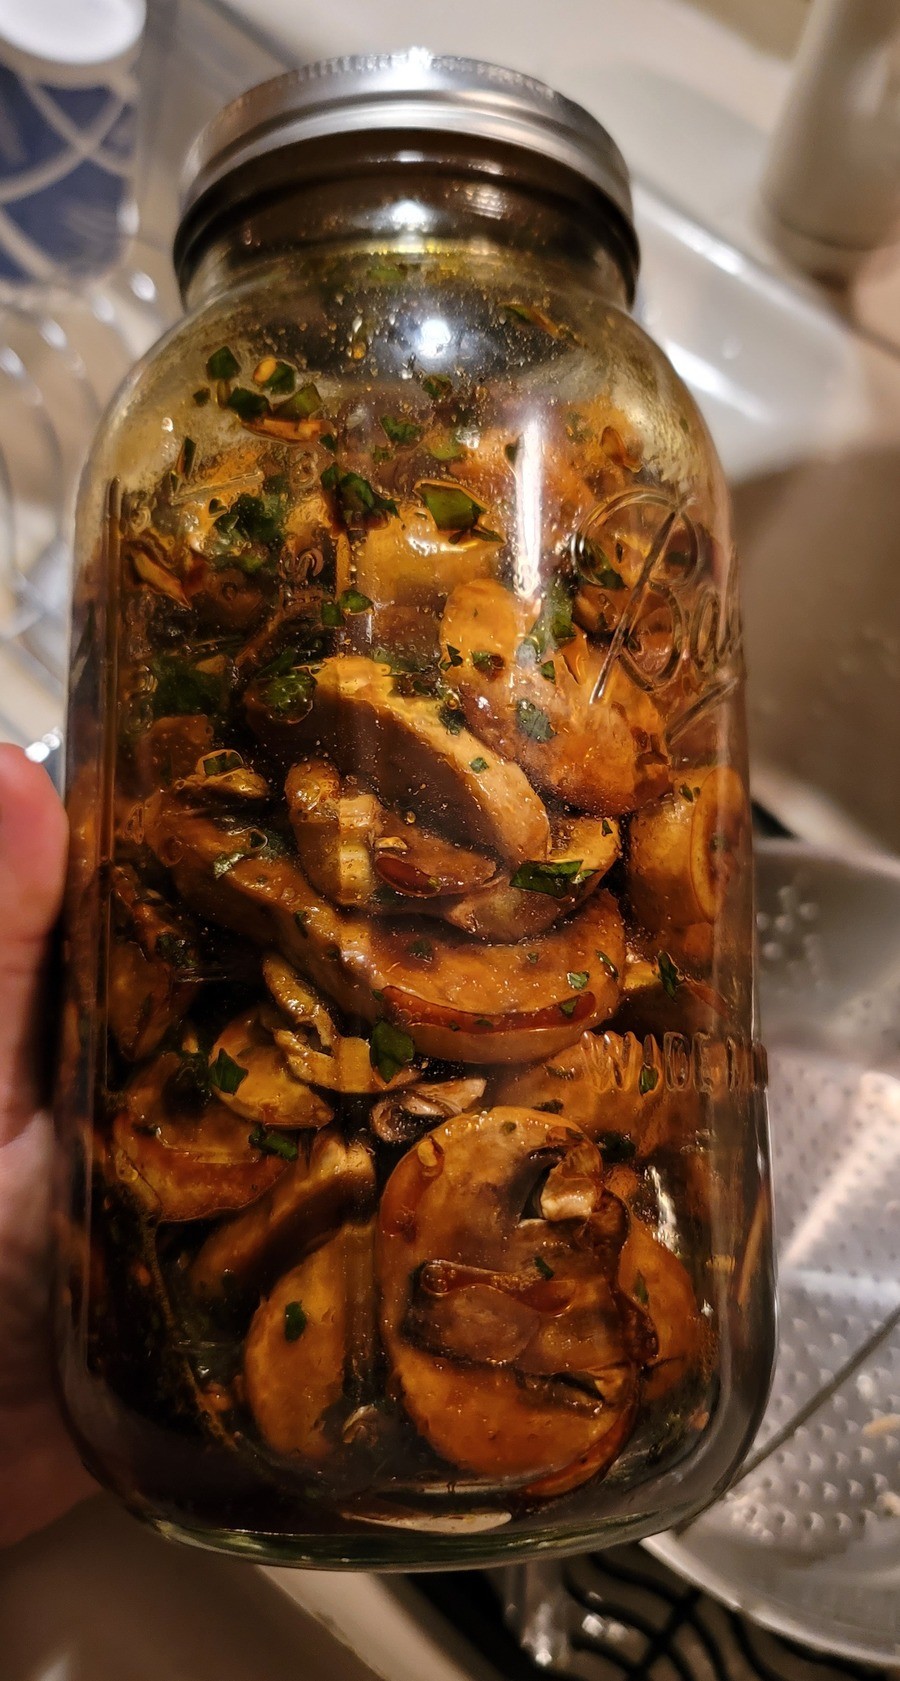 Mushroom jermy. Marinating it over night. Soy sauce, honey, chili flakes, fresh parsley, powdered ginger. And powdered garlic.. God I hate the internet. Nearly got nauseous when I saw this because I instantly thought it was full of old cum. Looks amazing, now that I know what it is. 12/1